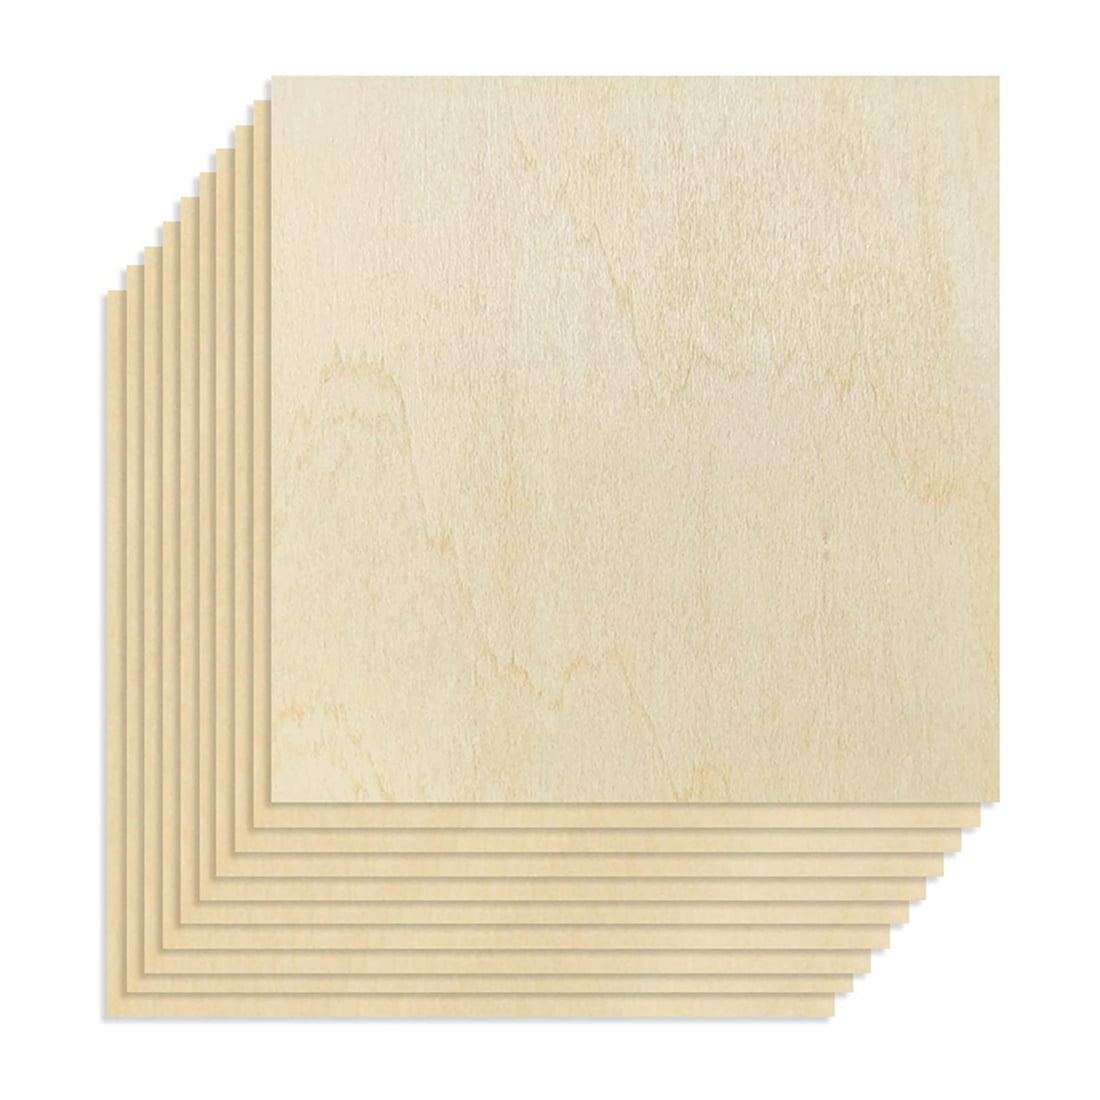  16 Pack Basswood Sheets 12x8x1/16, 15mm Basswood